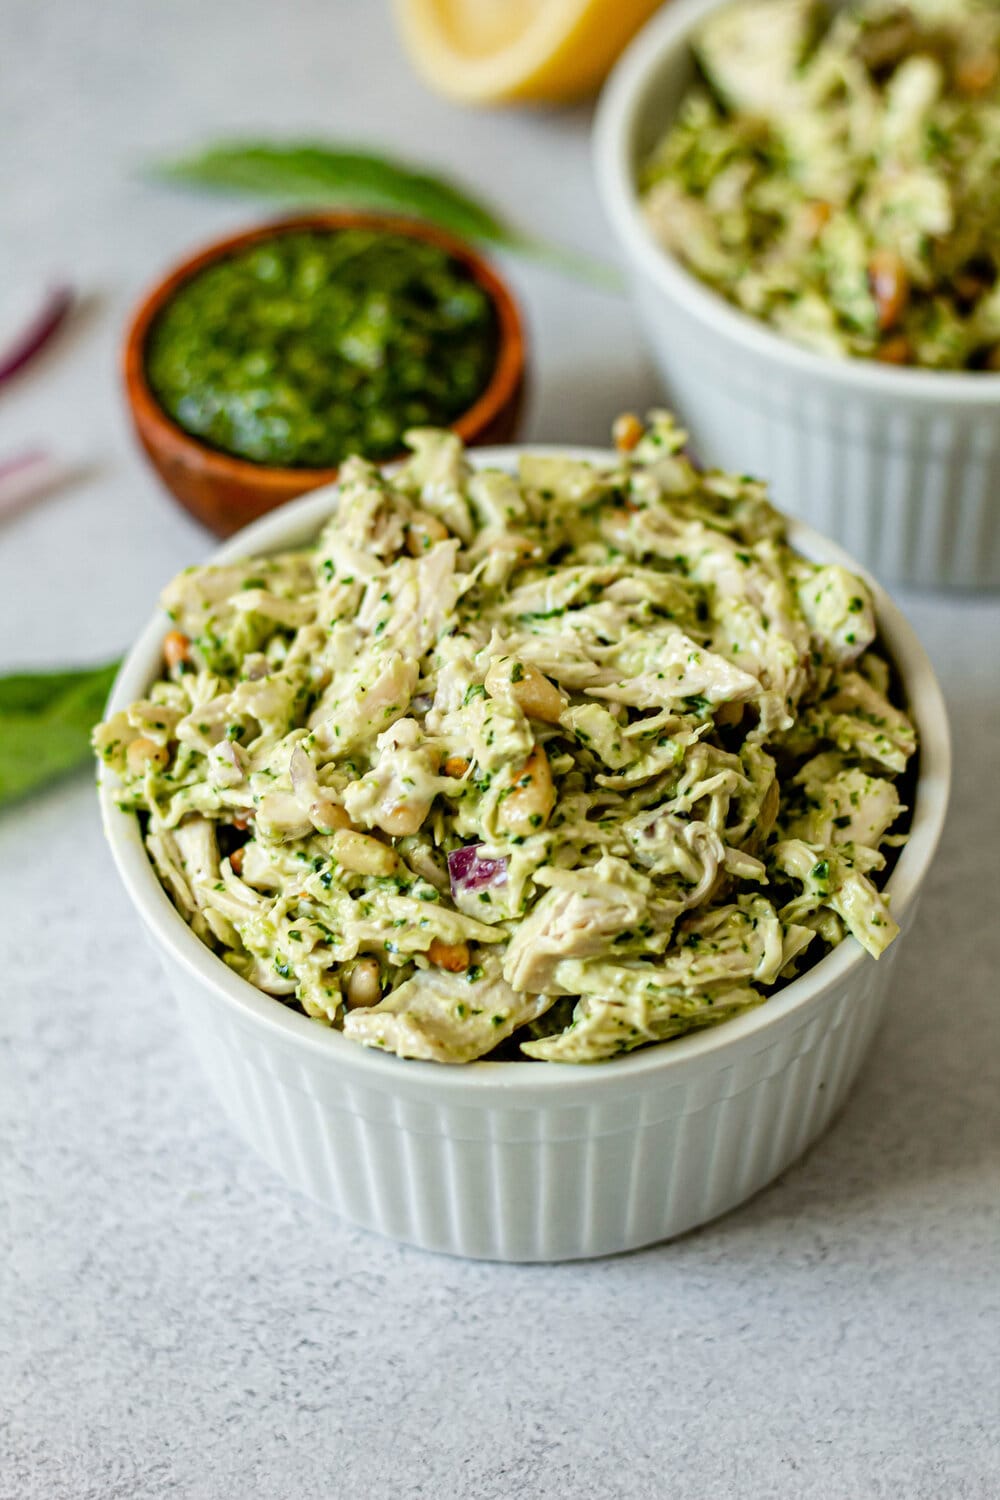 Pesto Chicken Salad (Whole30, Paleo, Dairy-Free) - All the Healthy Things